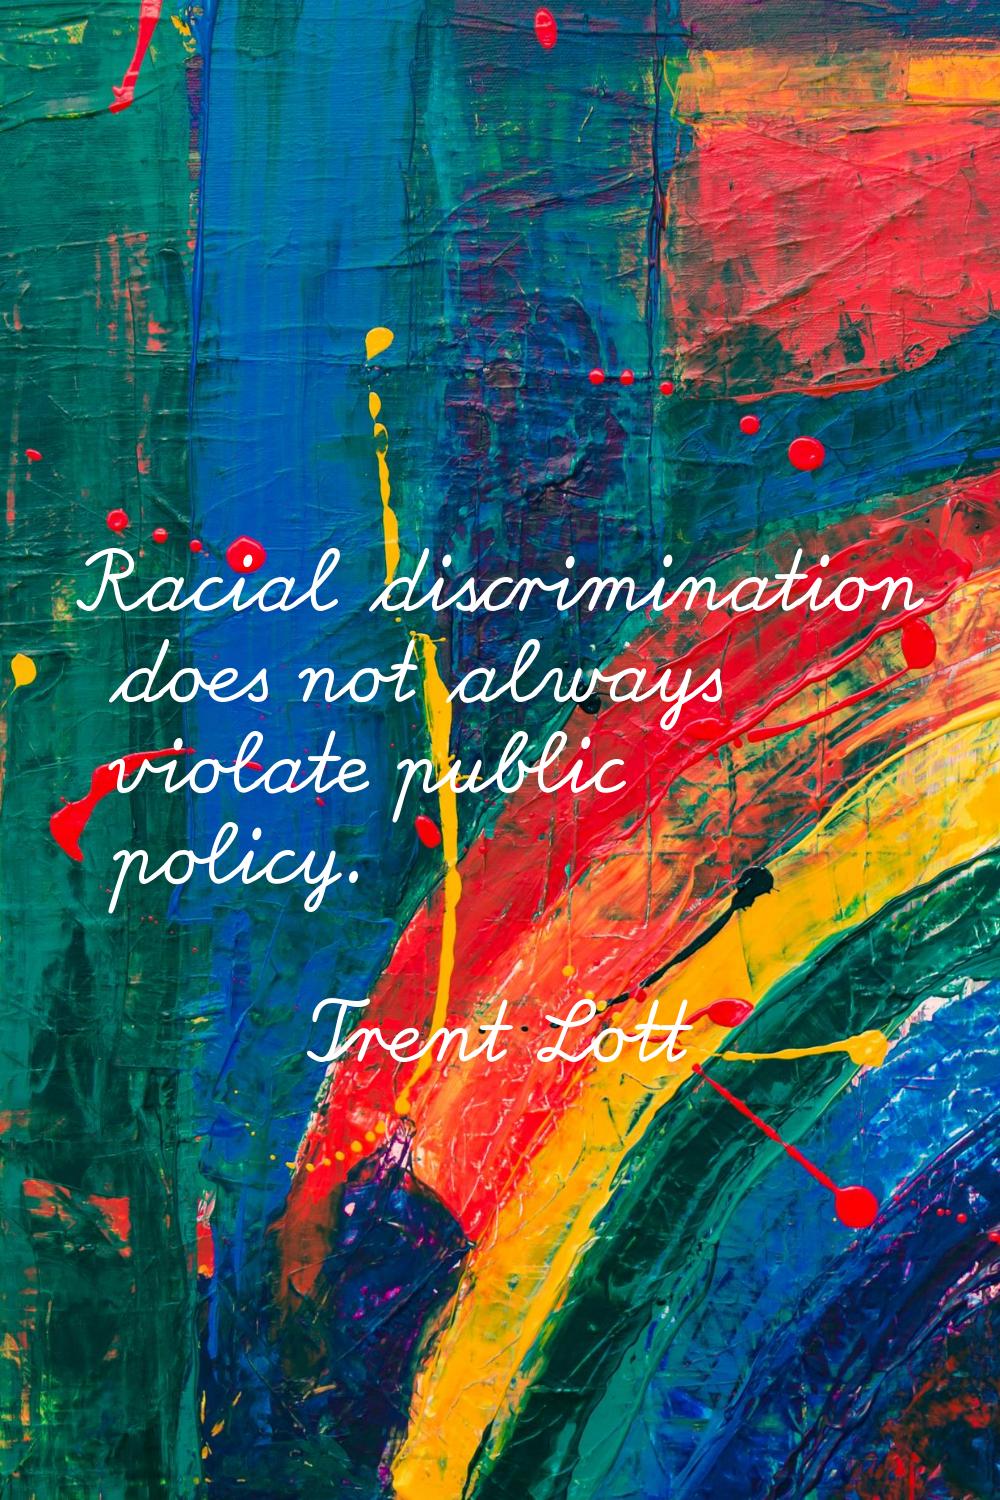 Racial discrimination does not always violate public policy.